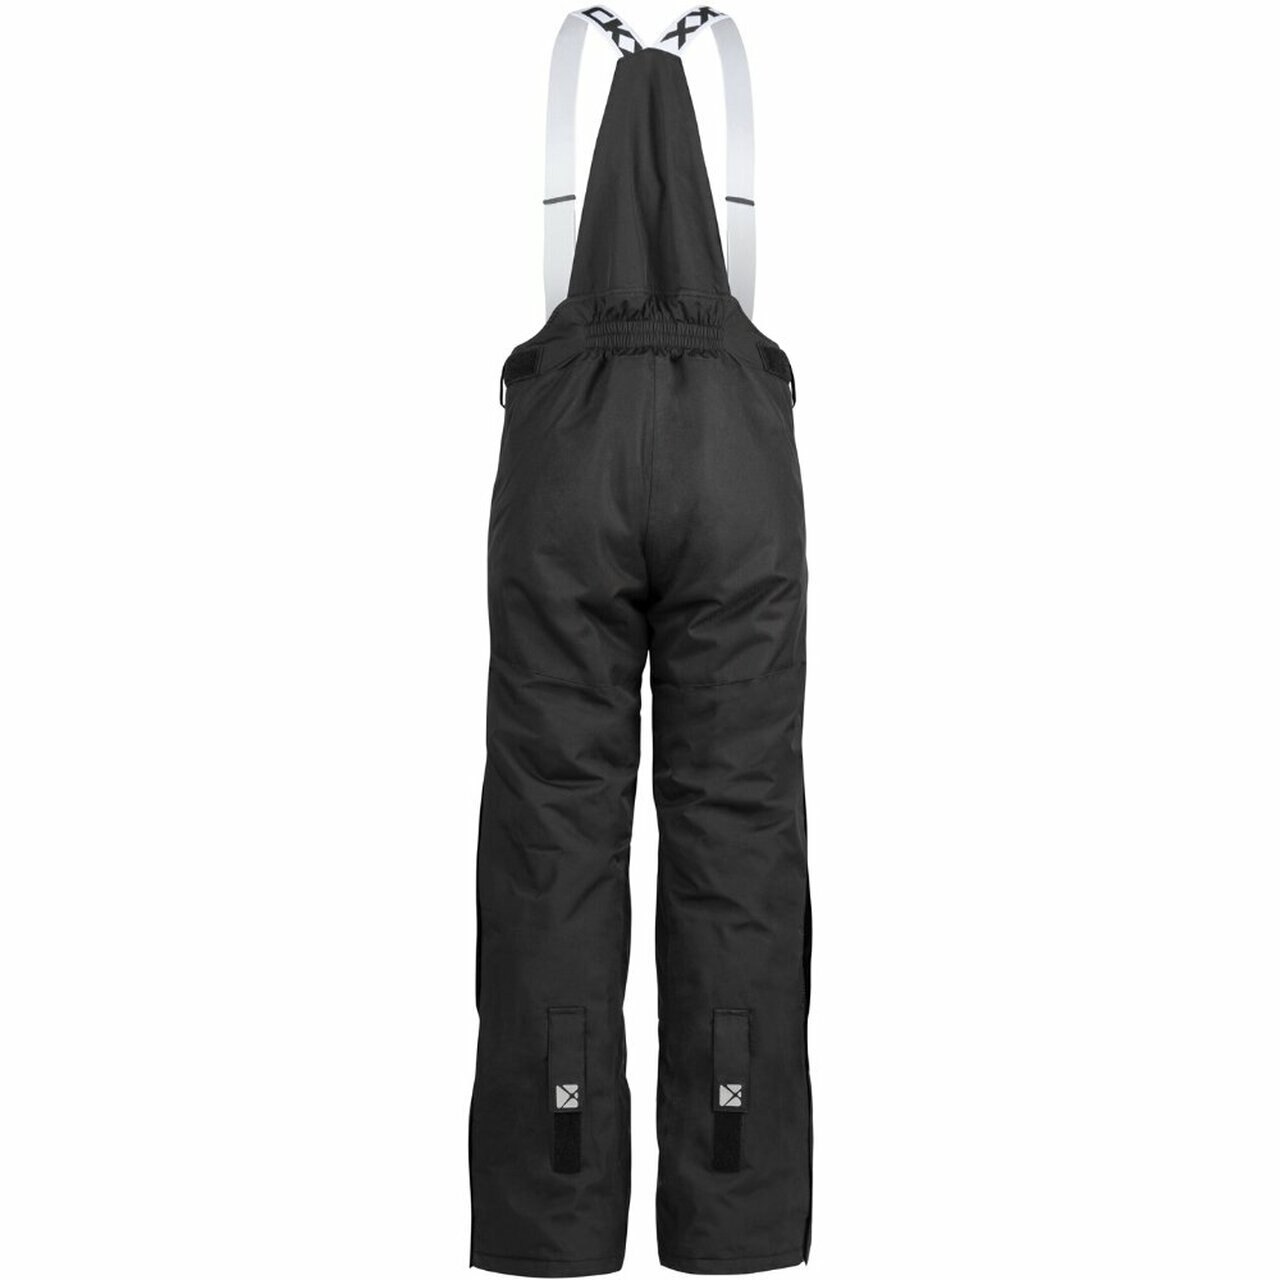 CKX WOMENS JOURNEY INSULATED PANTS